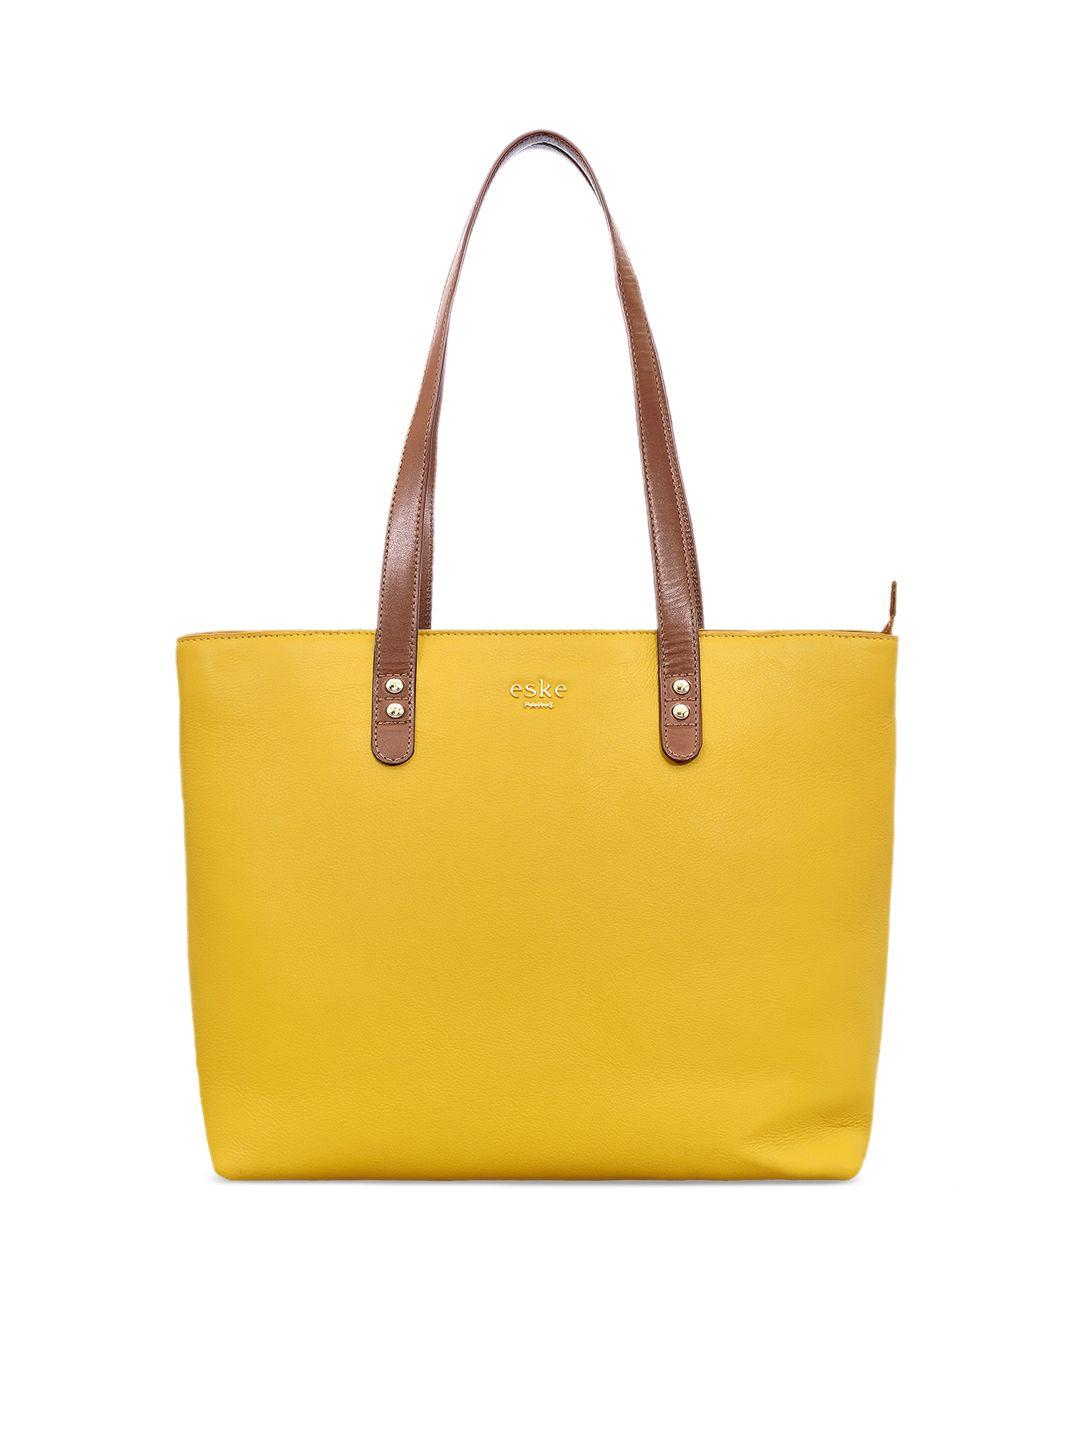 eske yellow leather shopper shoulder bag with quilted